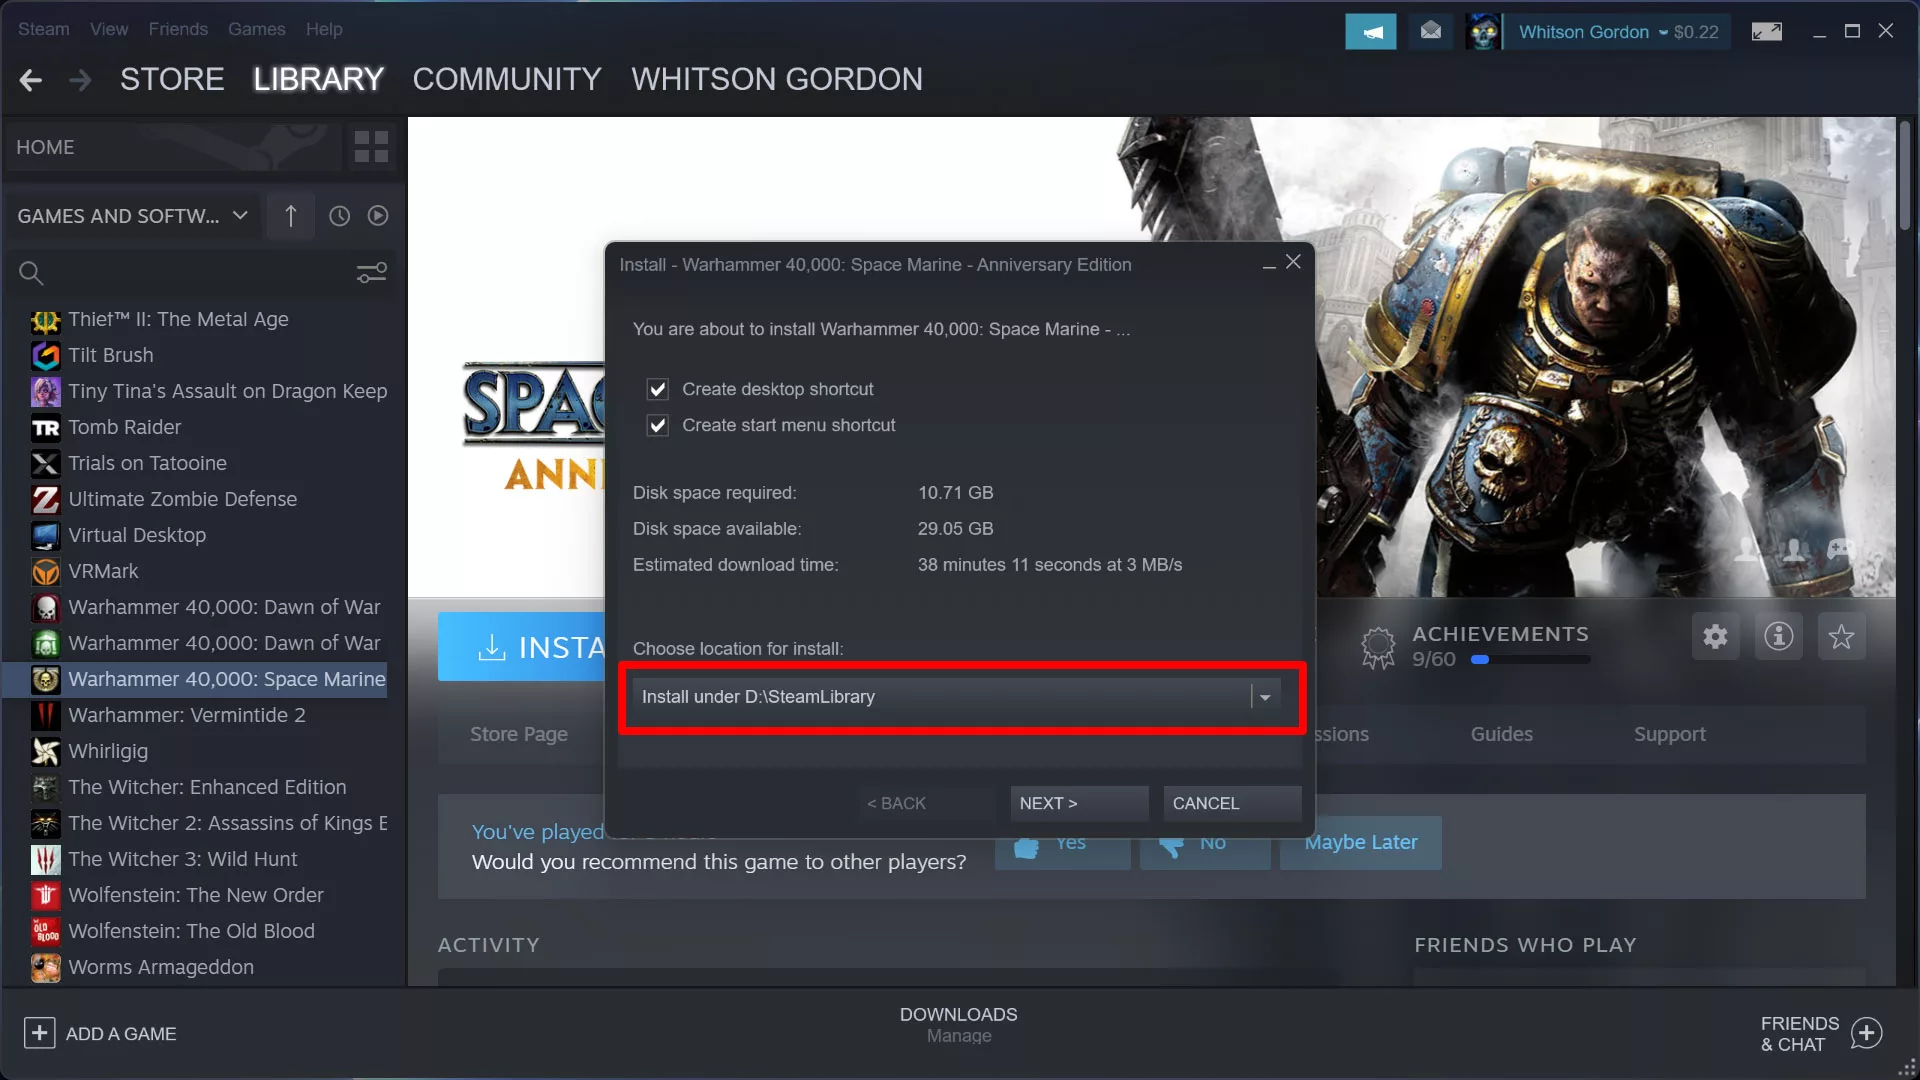 A screenshot of Steam's installation wizard, showing the ability to choose the install location.